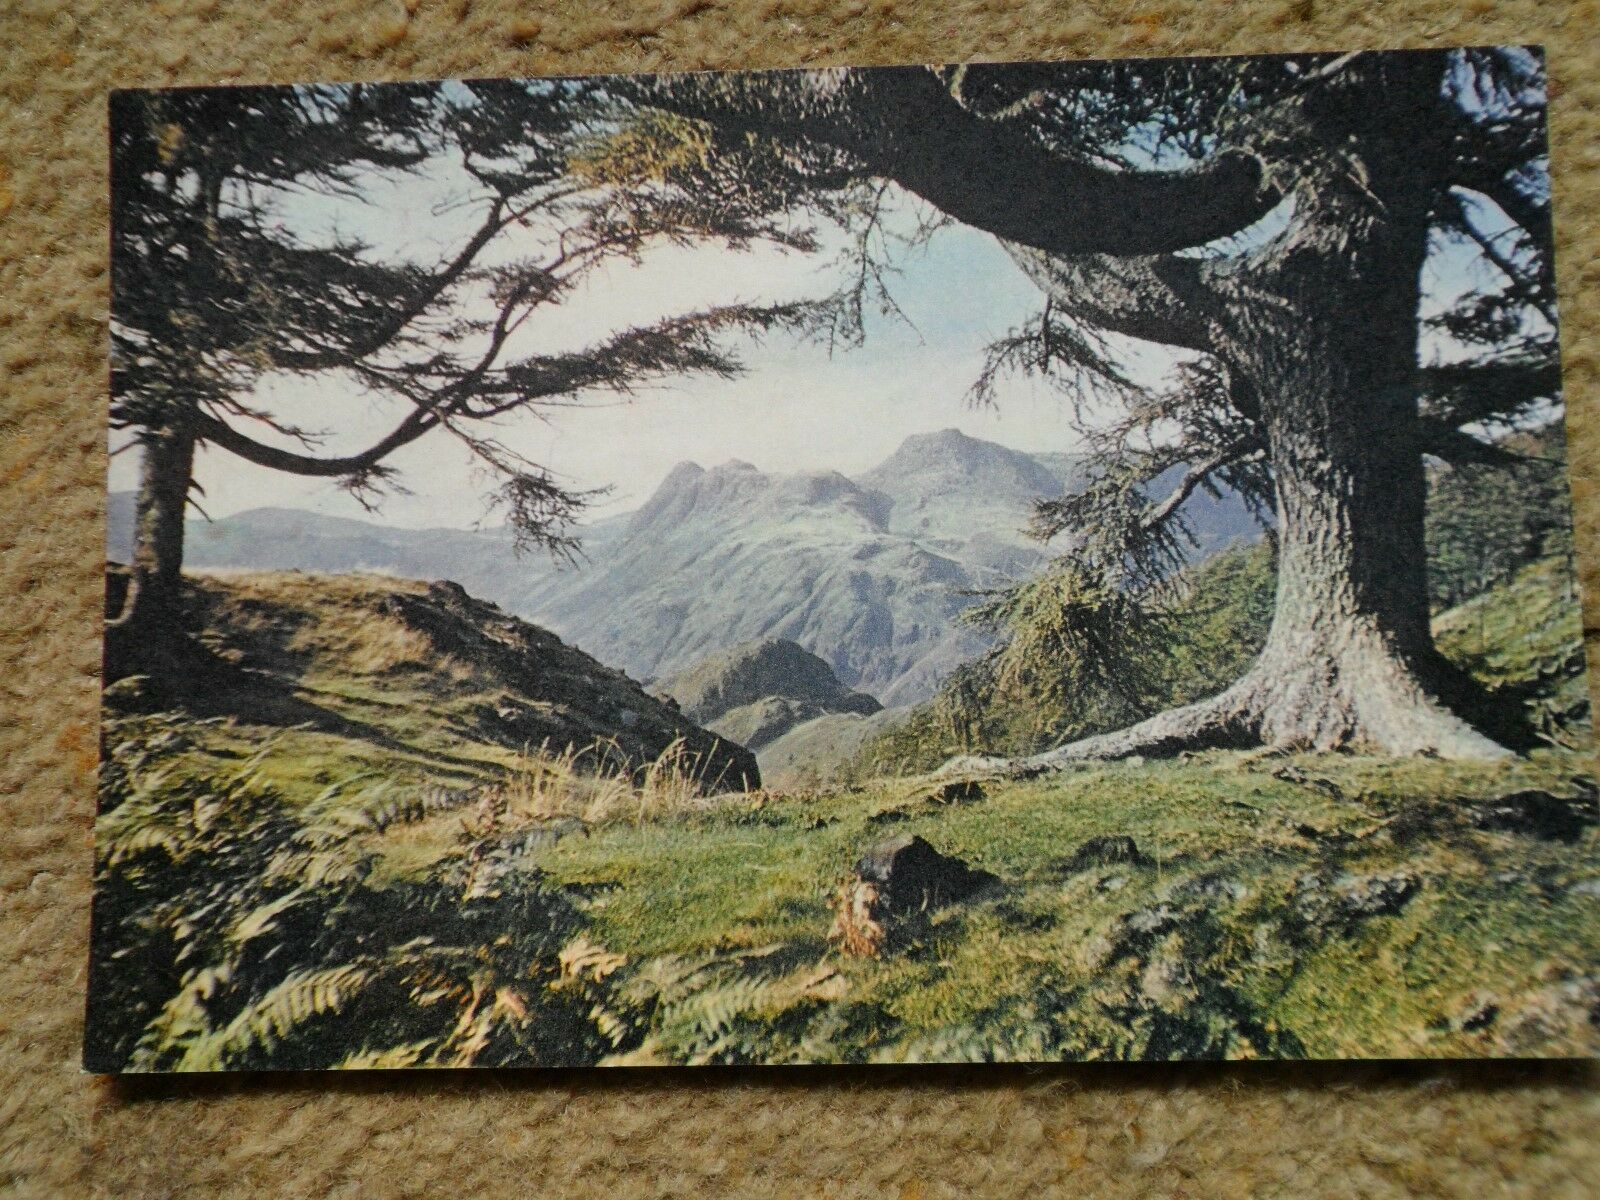 House Clearance - .J.ARTHUR DIXON.POSTCARD.LANGDALE PIKES FROM LINGMOOR FELL. NOT POSTED.